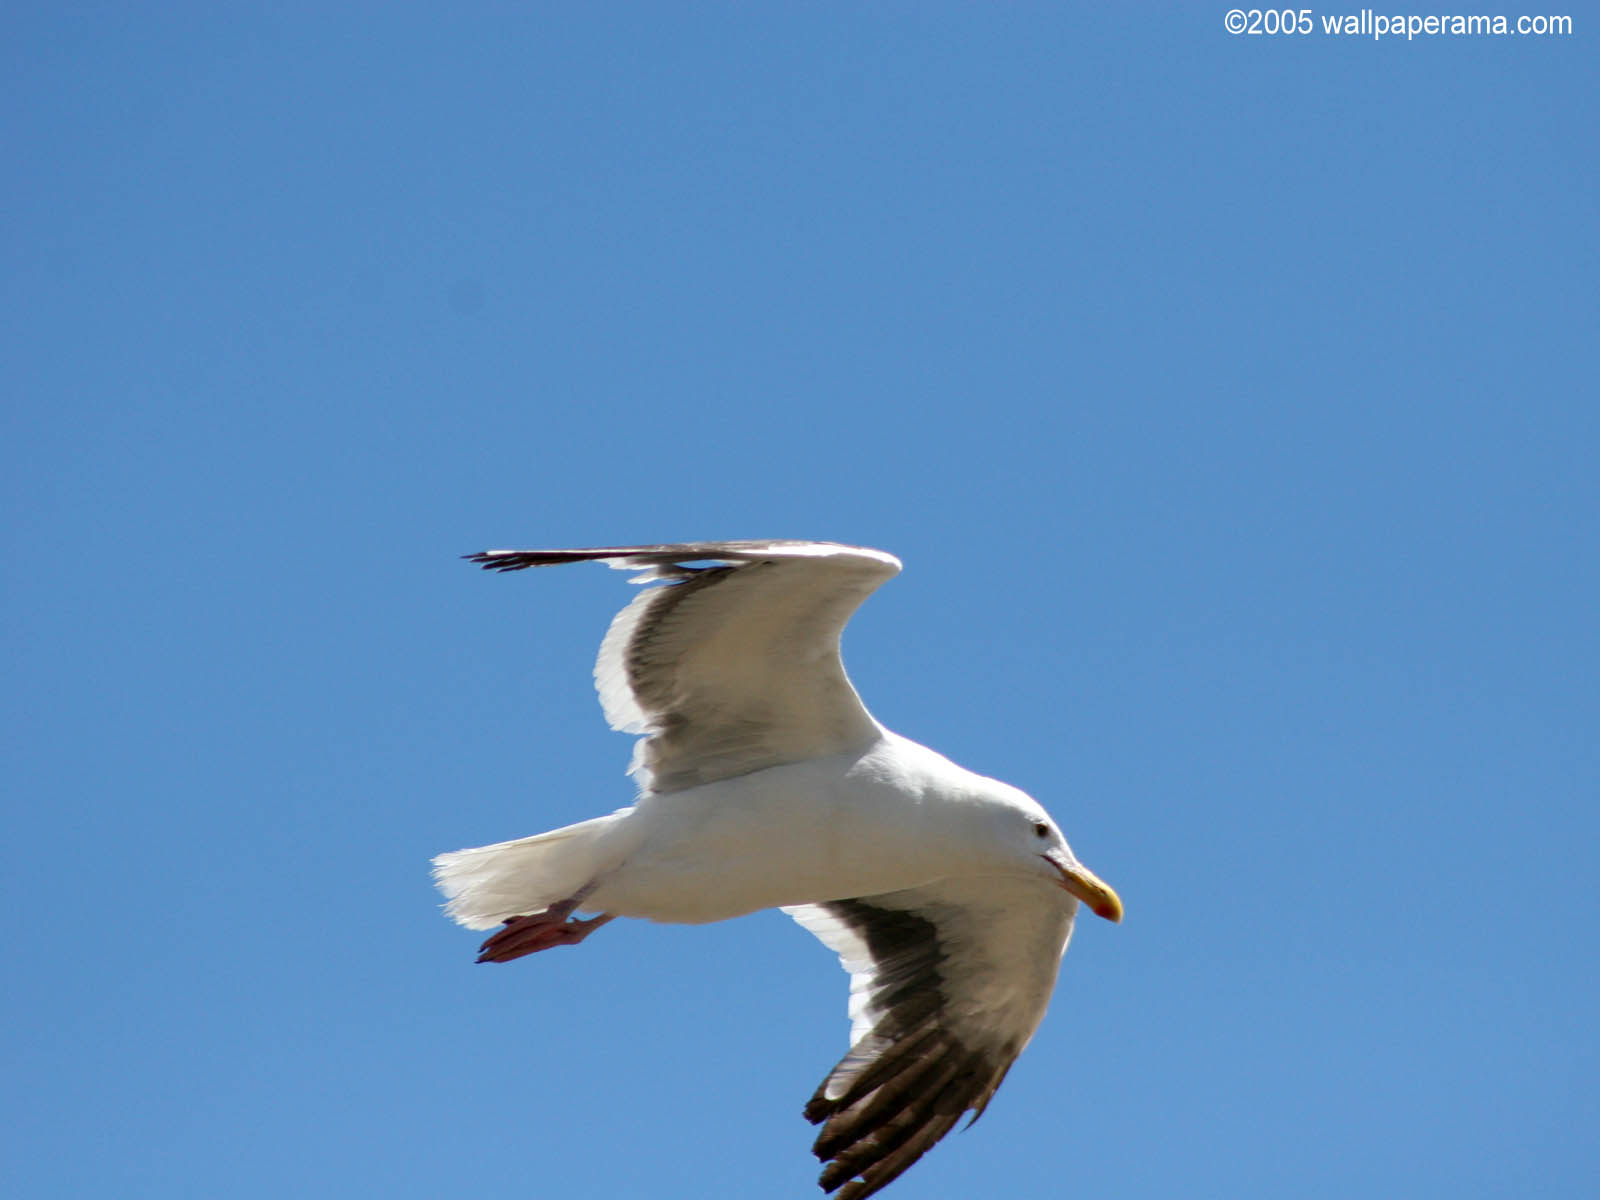 Flying Seagull Wallpaper Free HD Backgrounds Images Pictures